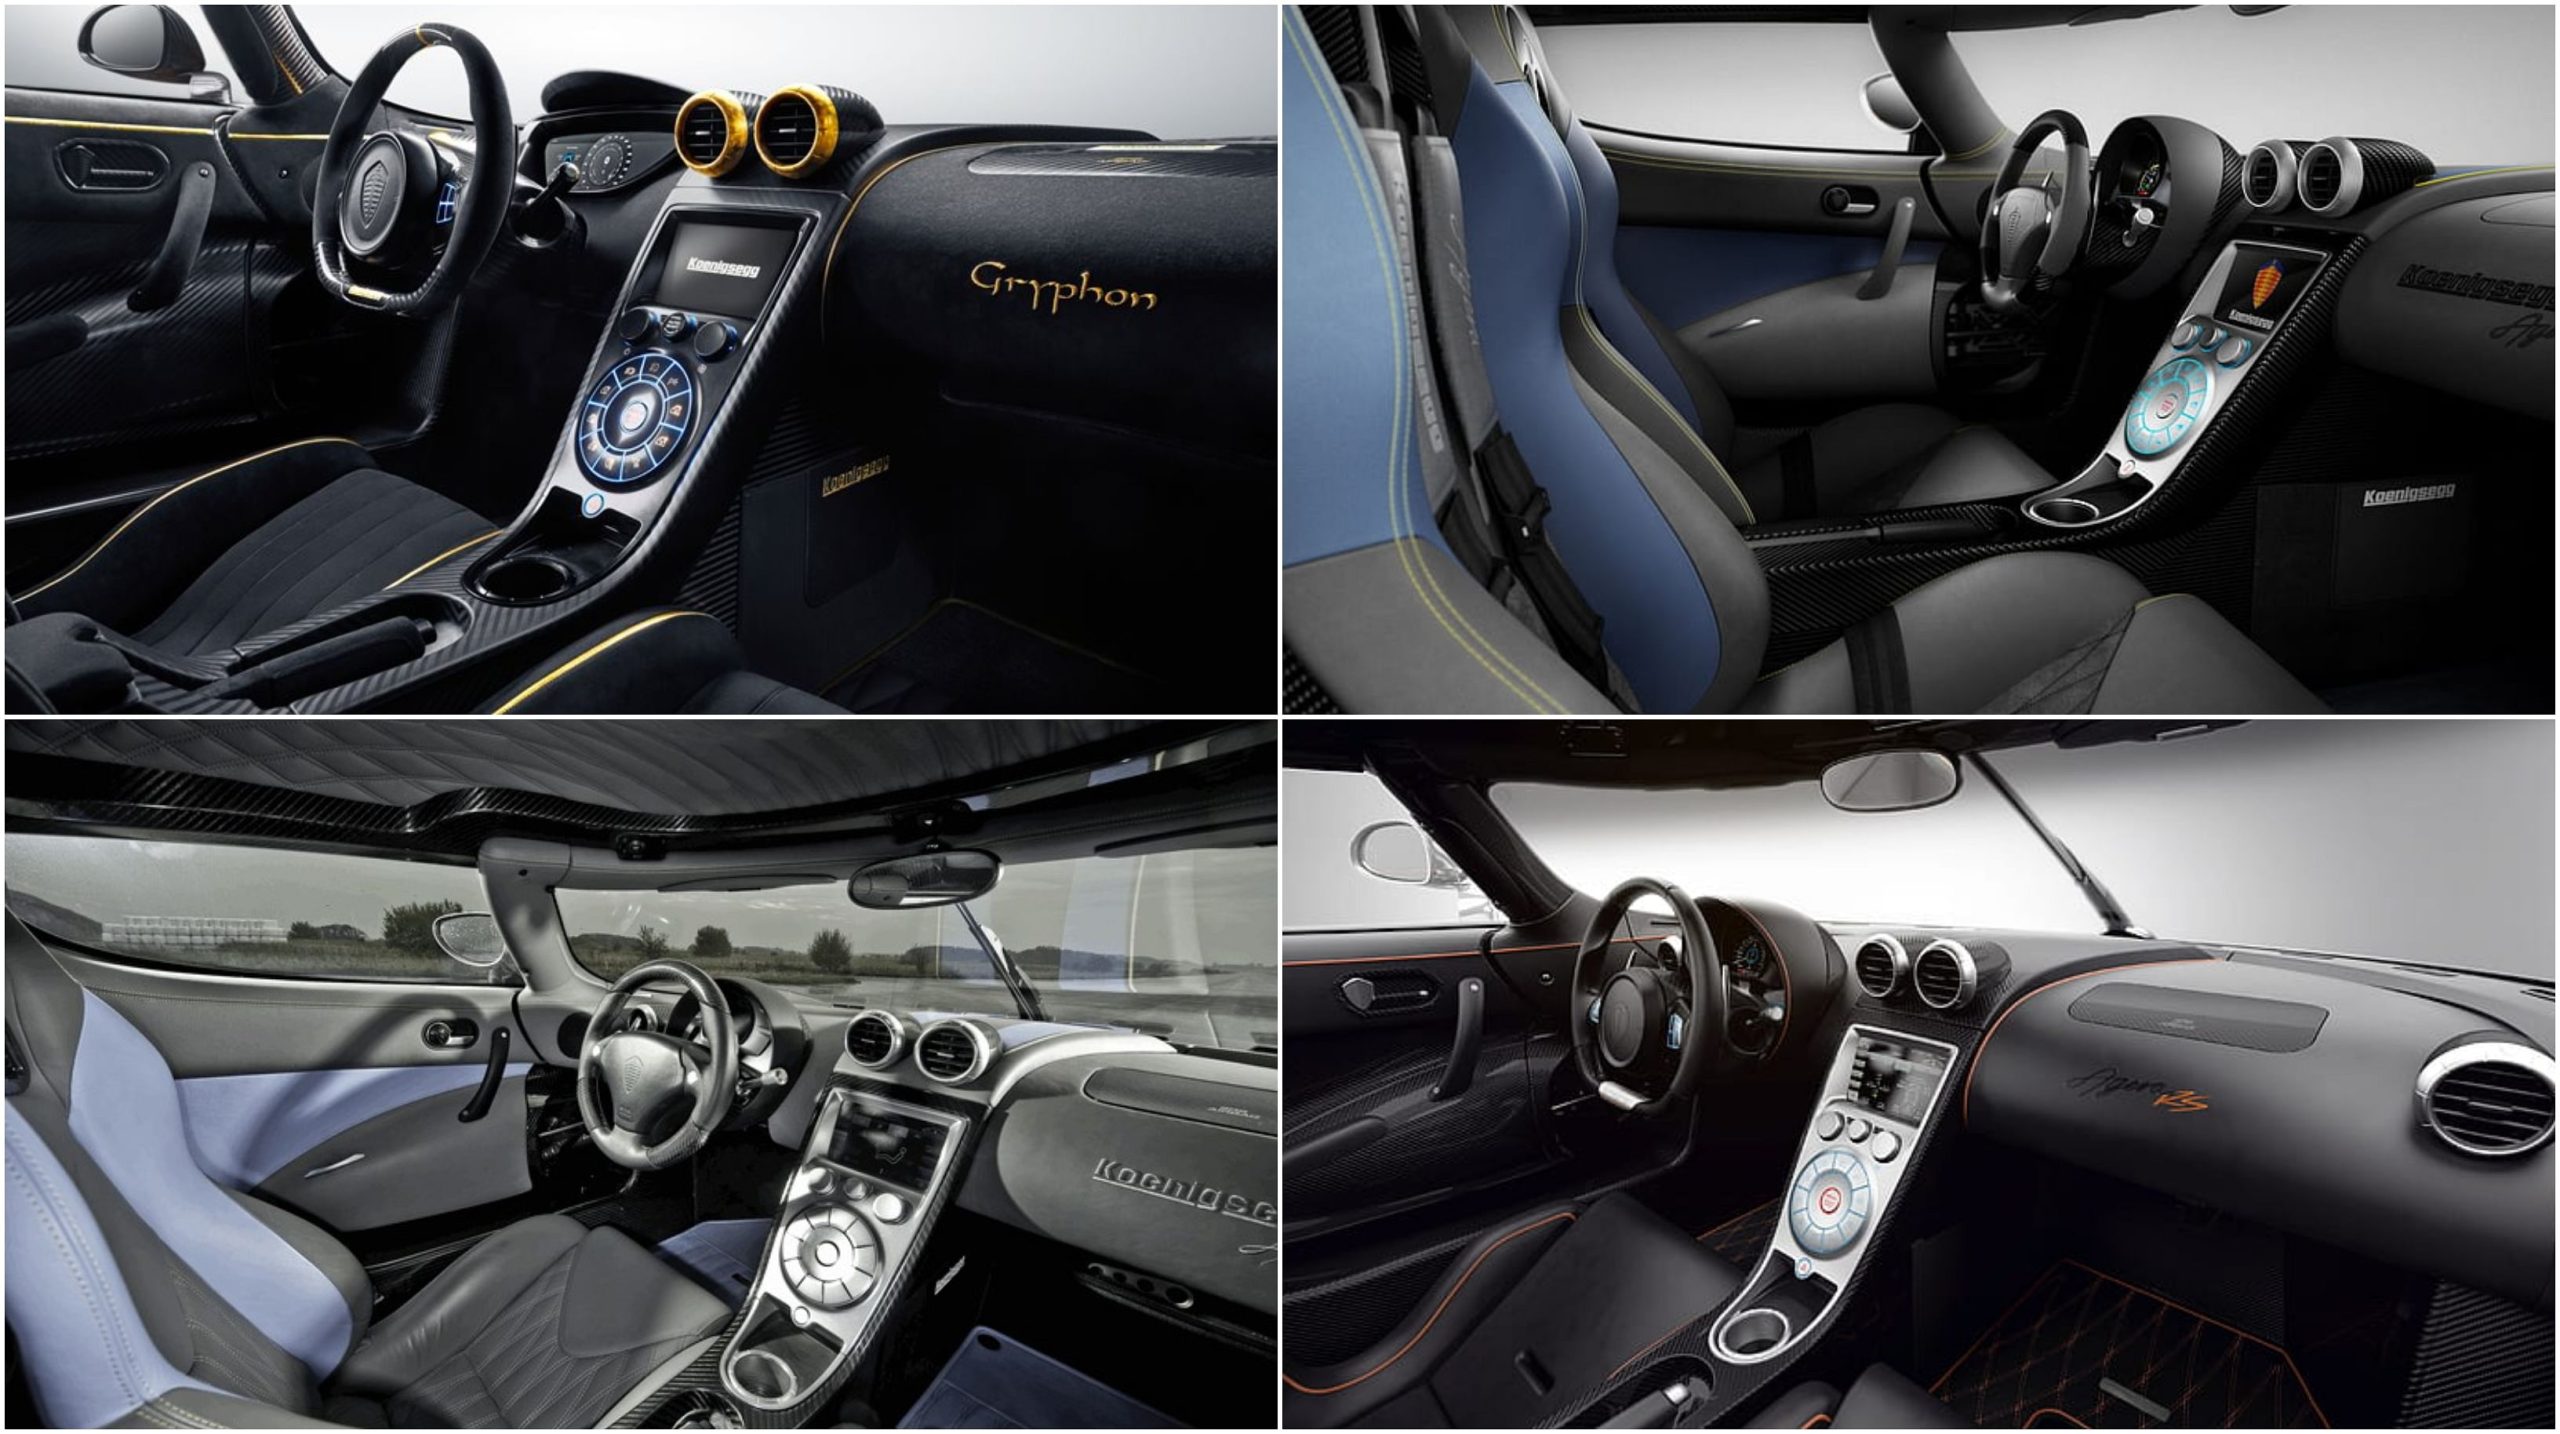 The Interior of the Agera: